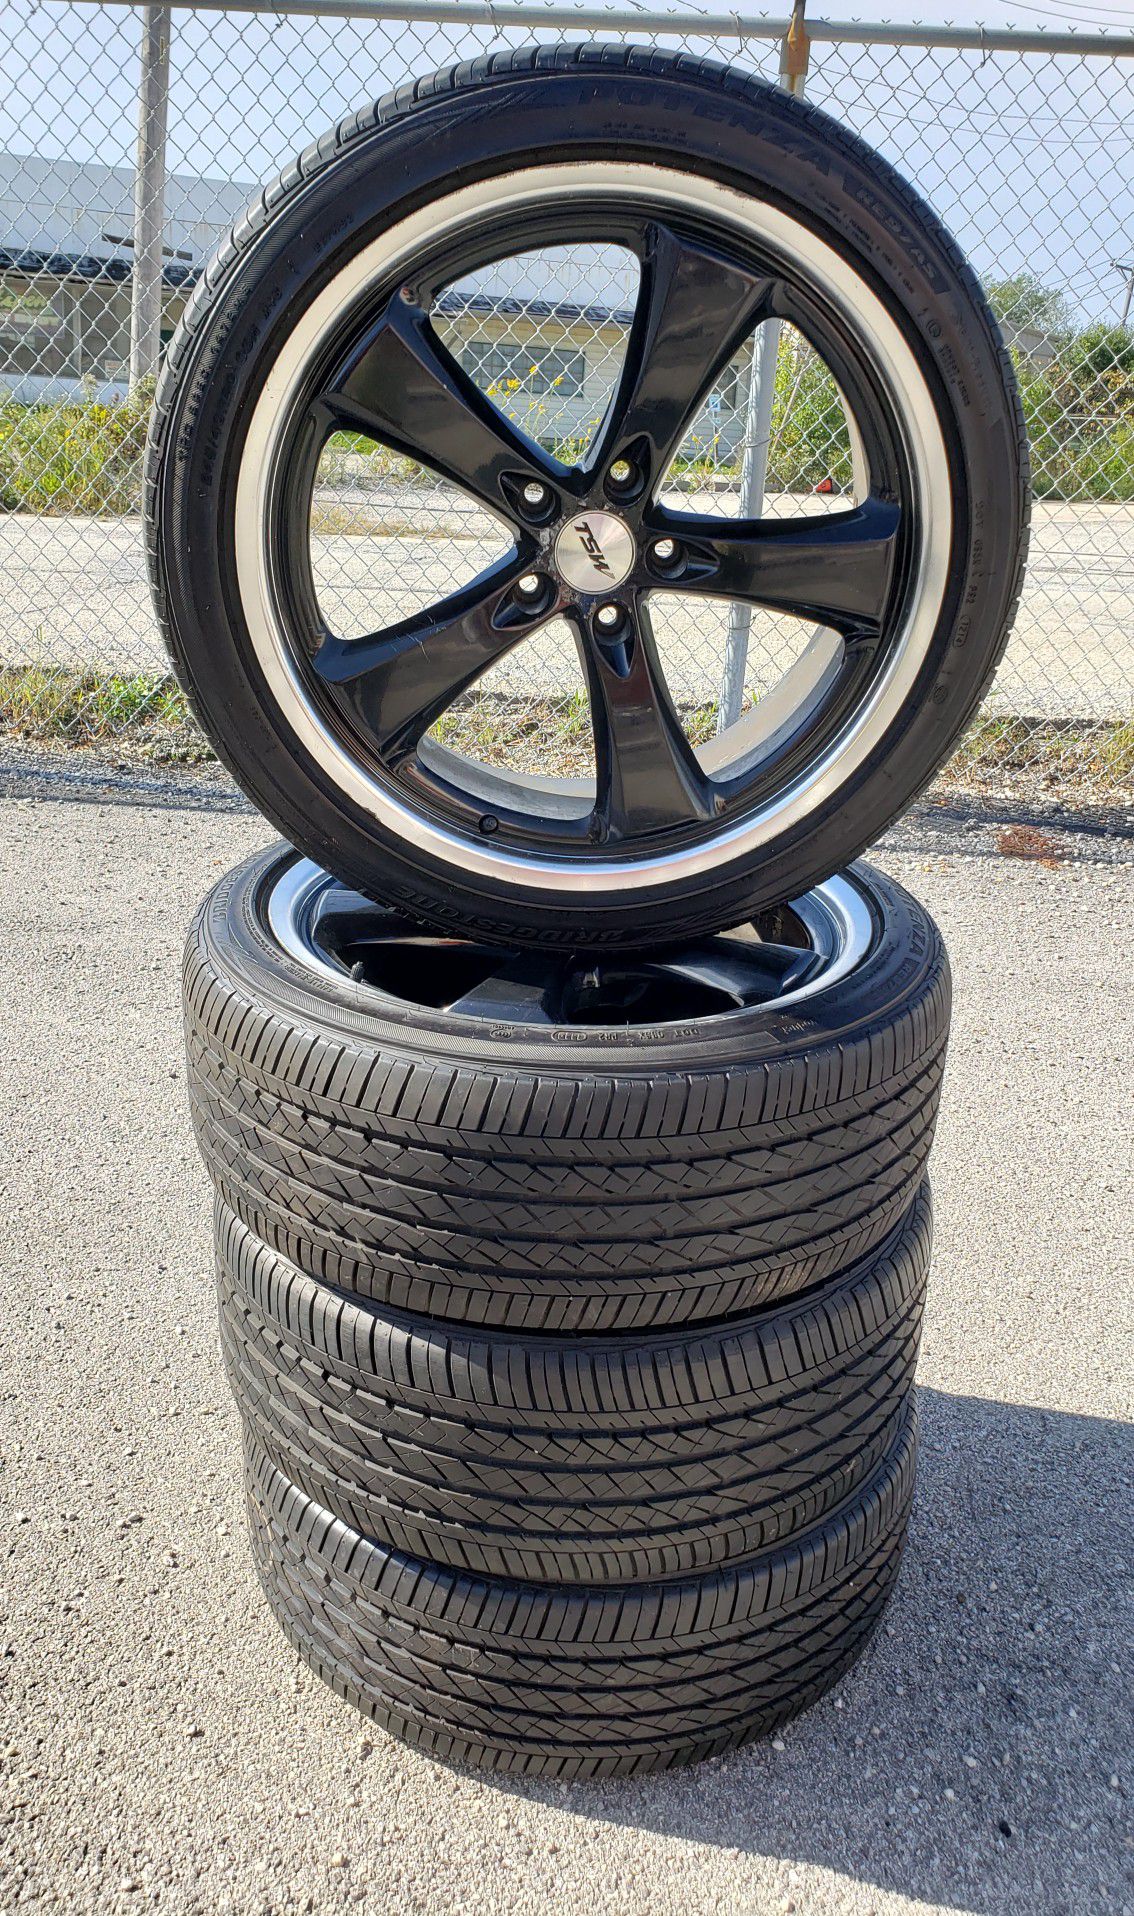 TSW 20" rims and tires